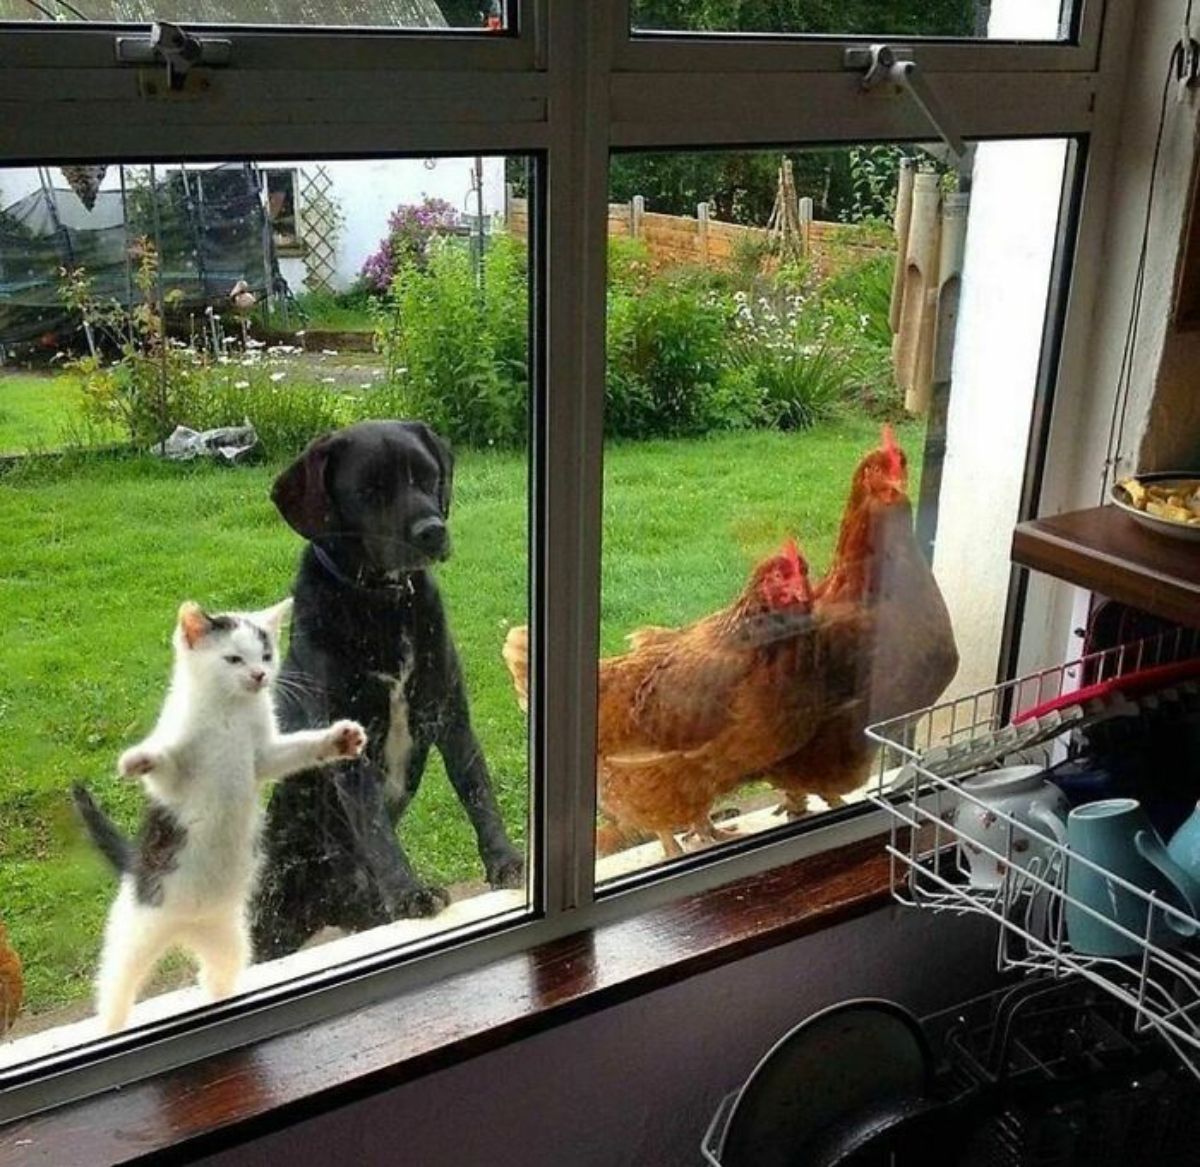 black and white kitten, black dog and 2 brown chickens looking into a house through a window